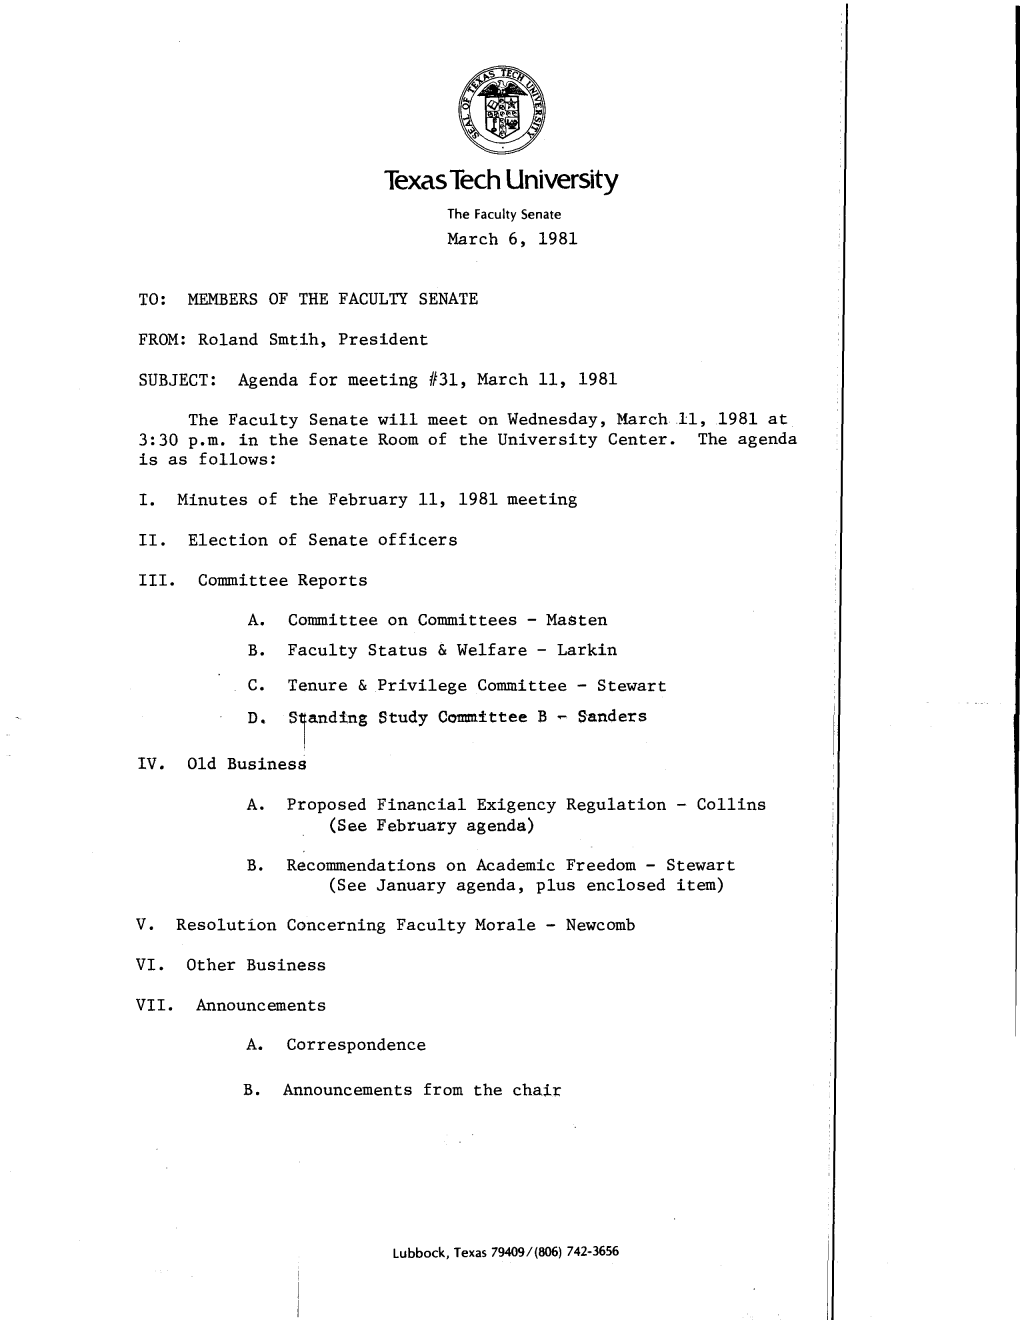 Agenda for Meeting #31, March 11, 1981